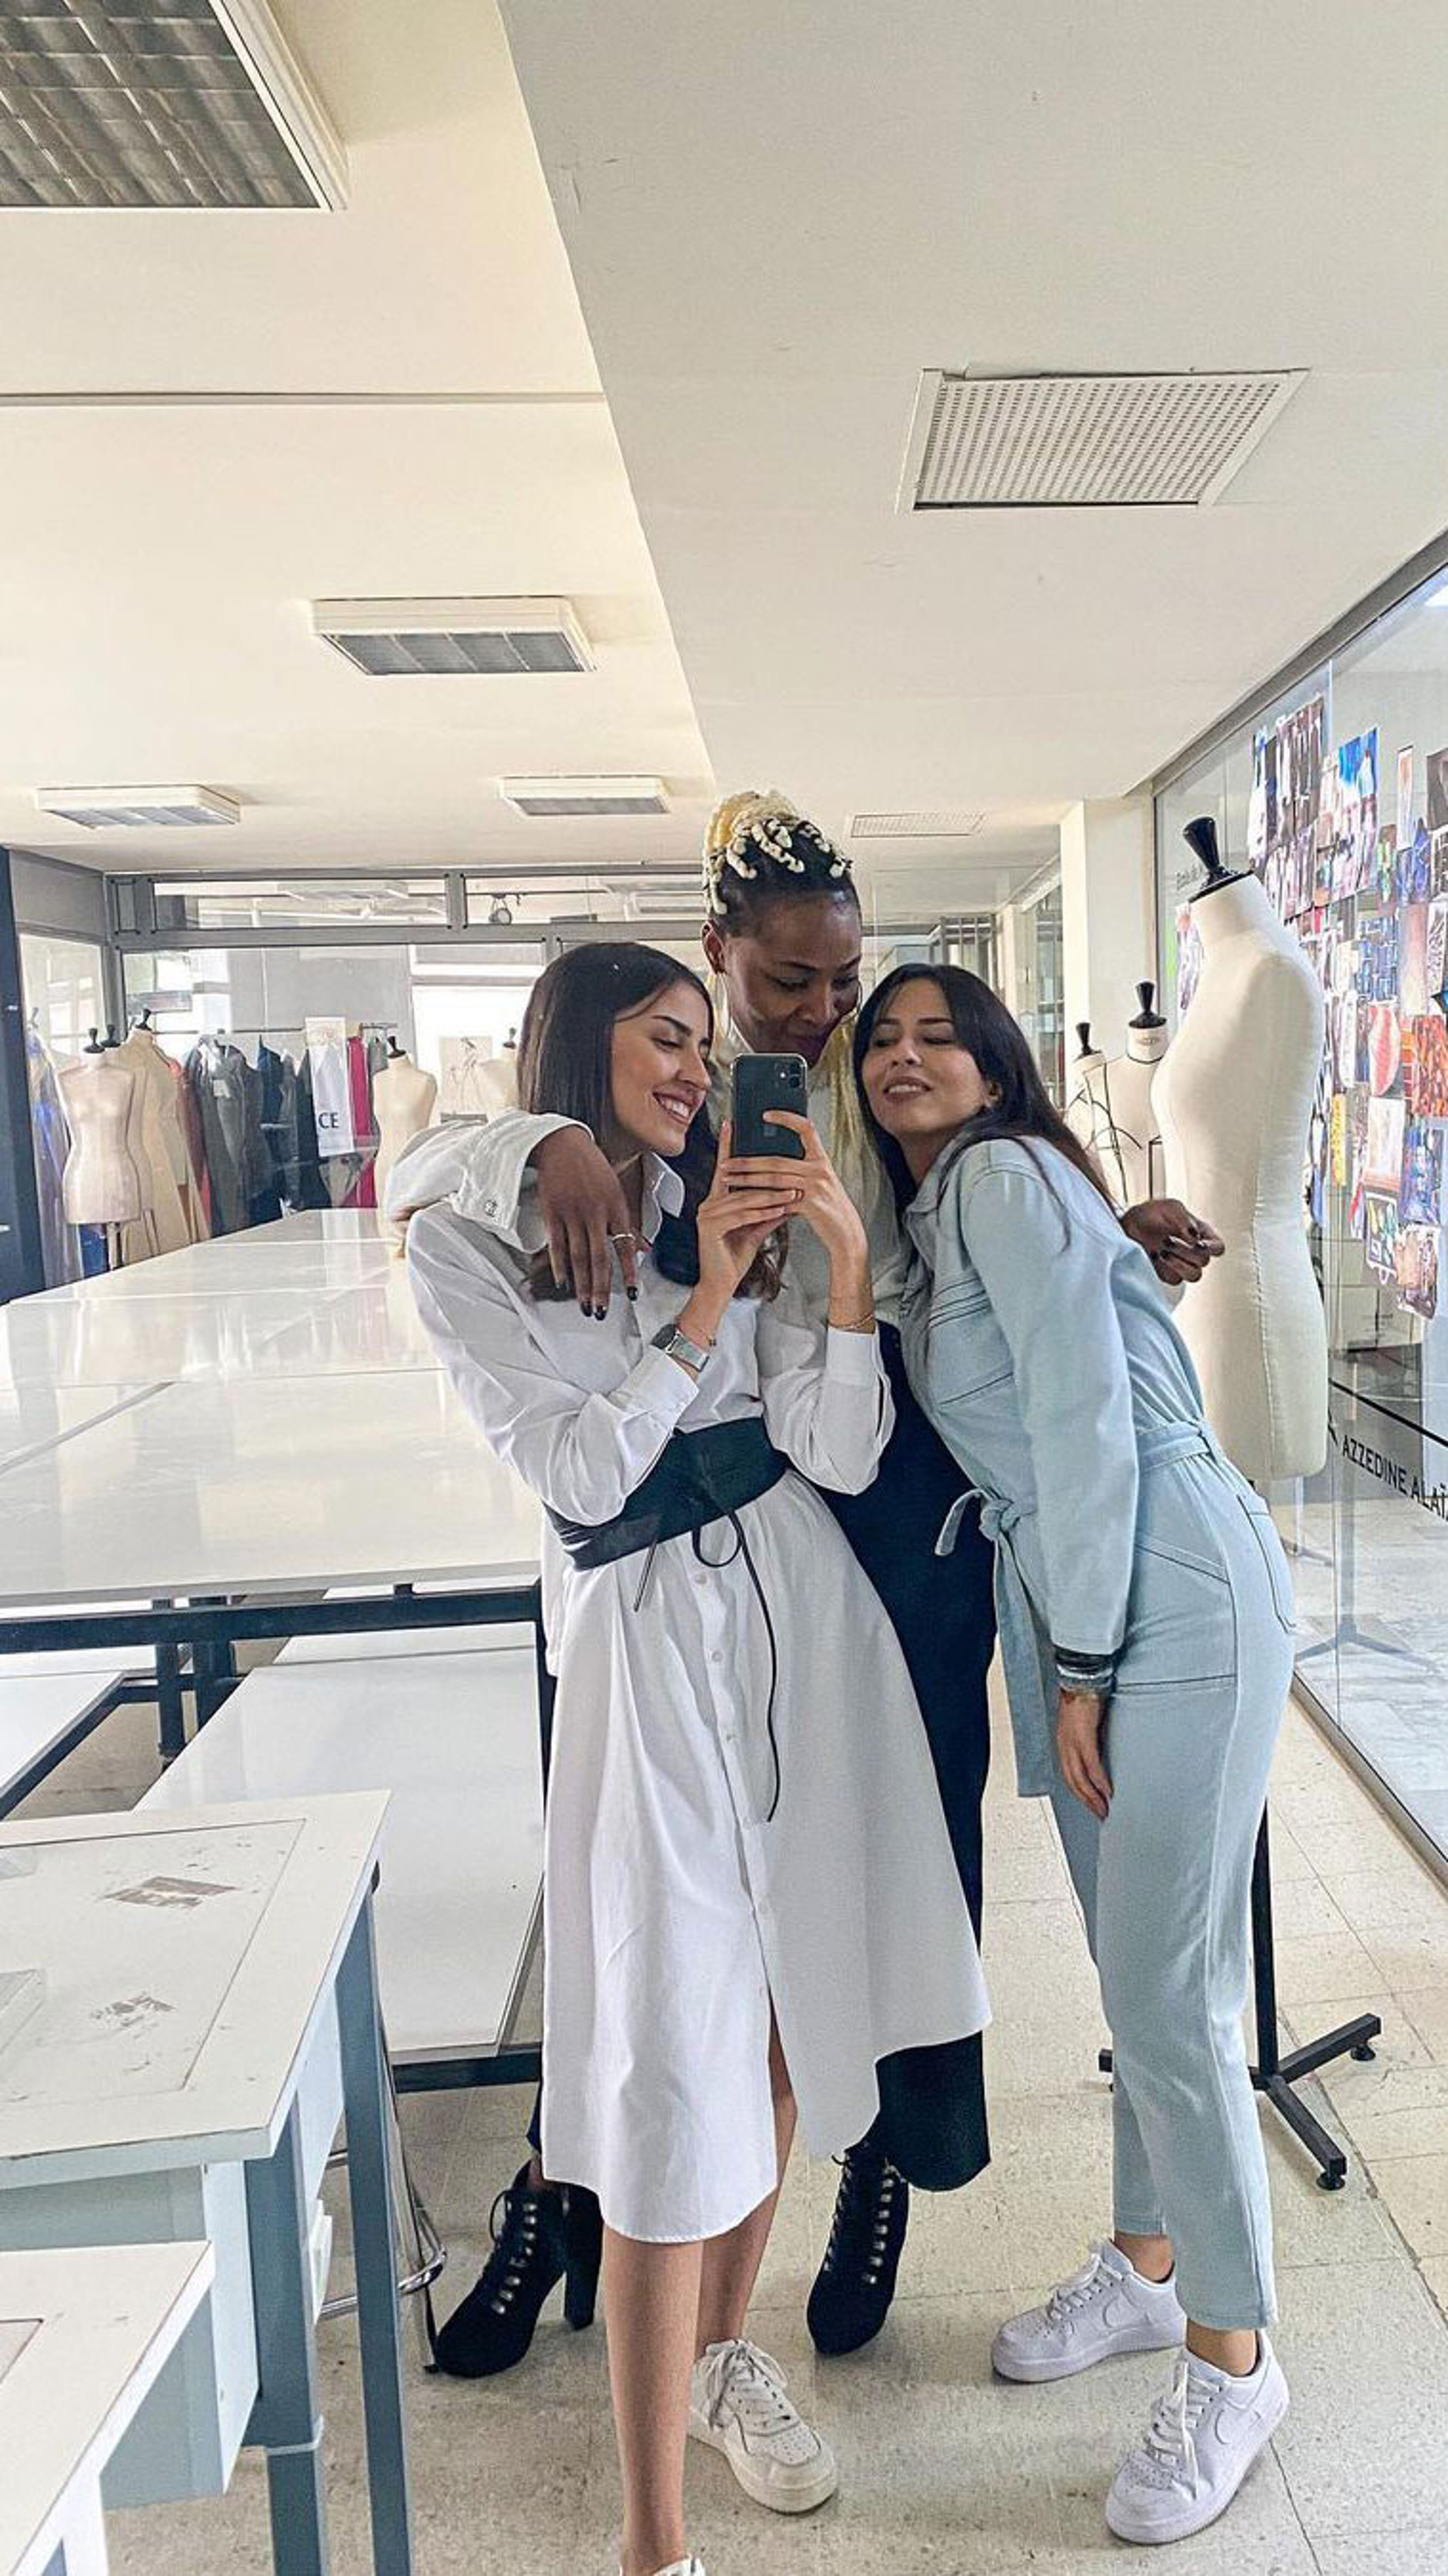 Three friends taking a selfie together in a fashion design studio, surrounded by mannequins and design sketches.